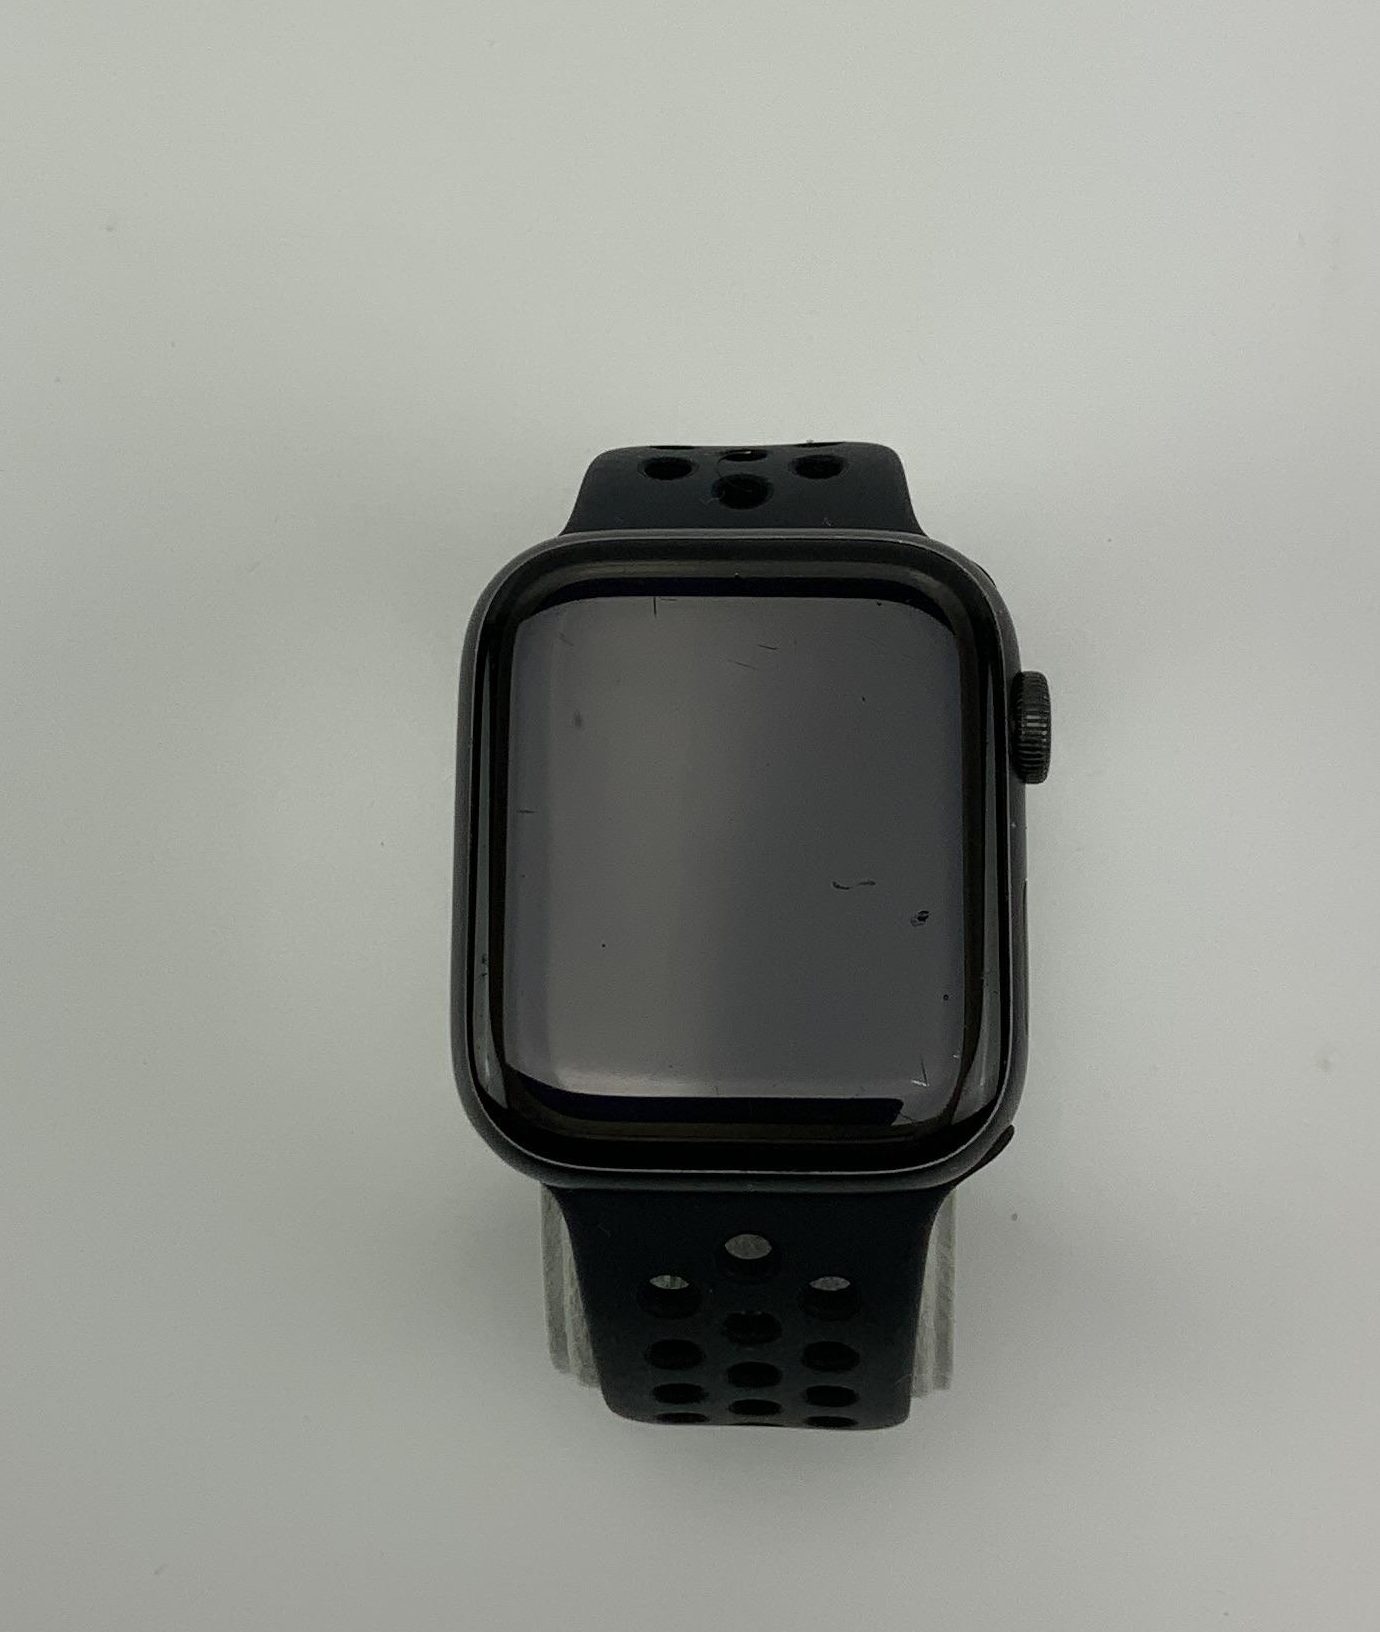 Watch Series 5 Aluminum Cellular (44mm), Space Gray, image 1